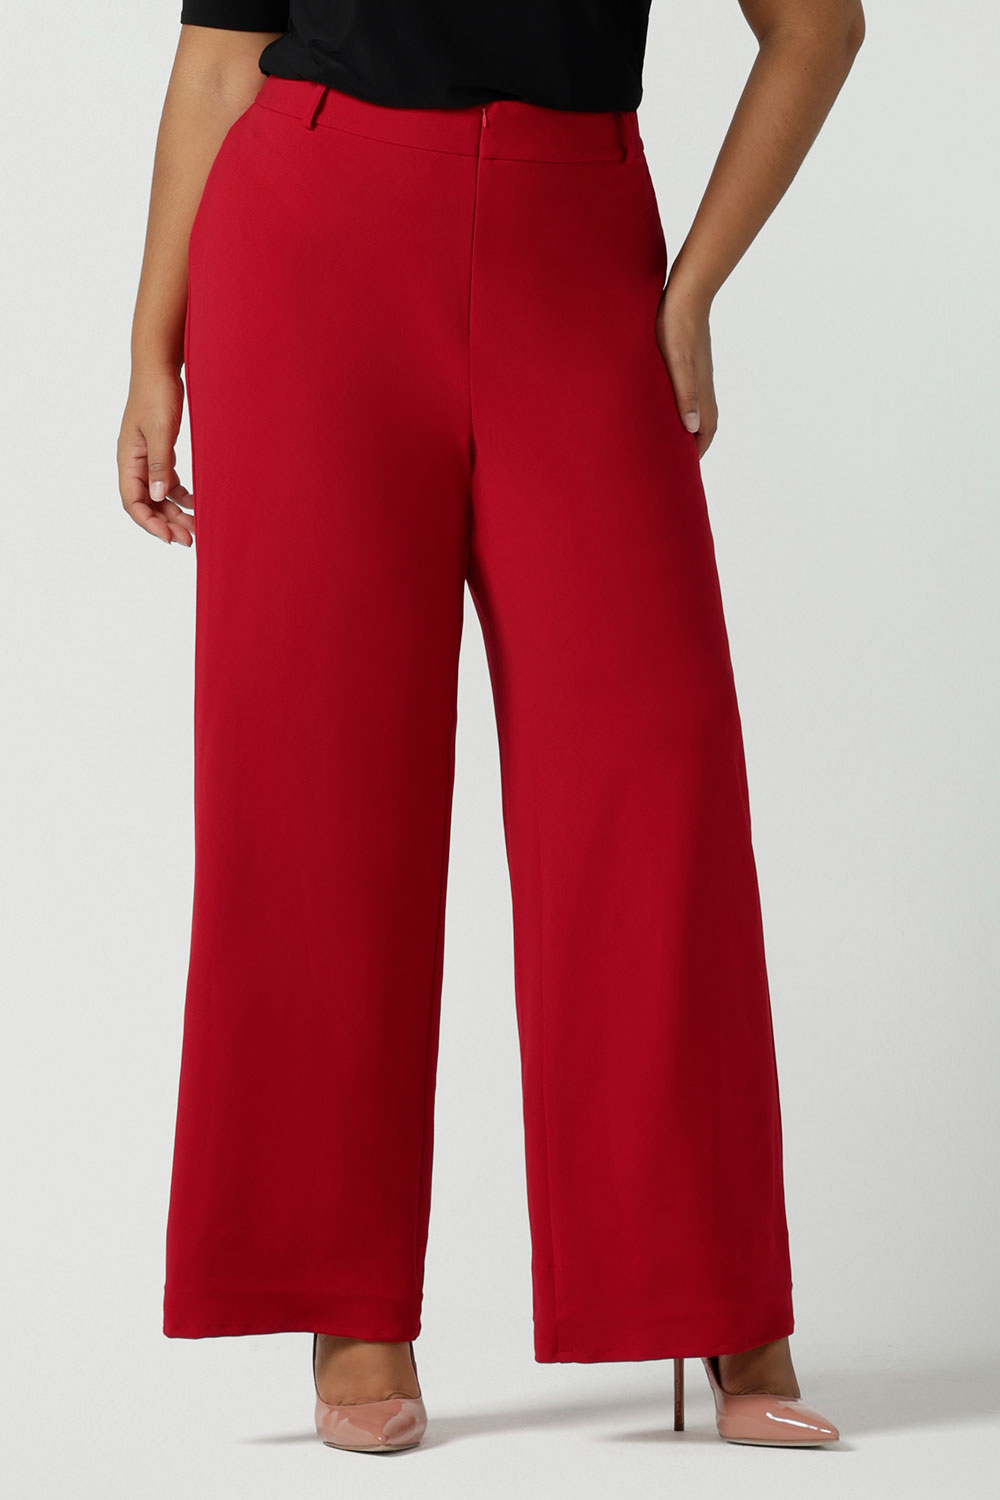 Close up of a size 16 woman wears the Drew pant in red, high waist and invisible fly front. Tailored belt loops and wide leg. Made in Australia for women. Stylish corporate wear for women. Made in Australia size 8 - 24.